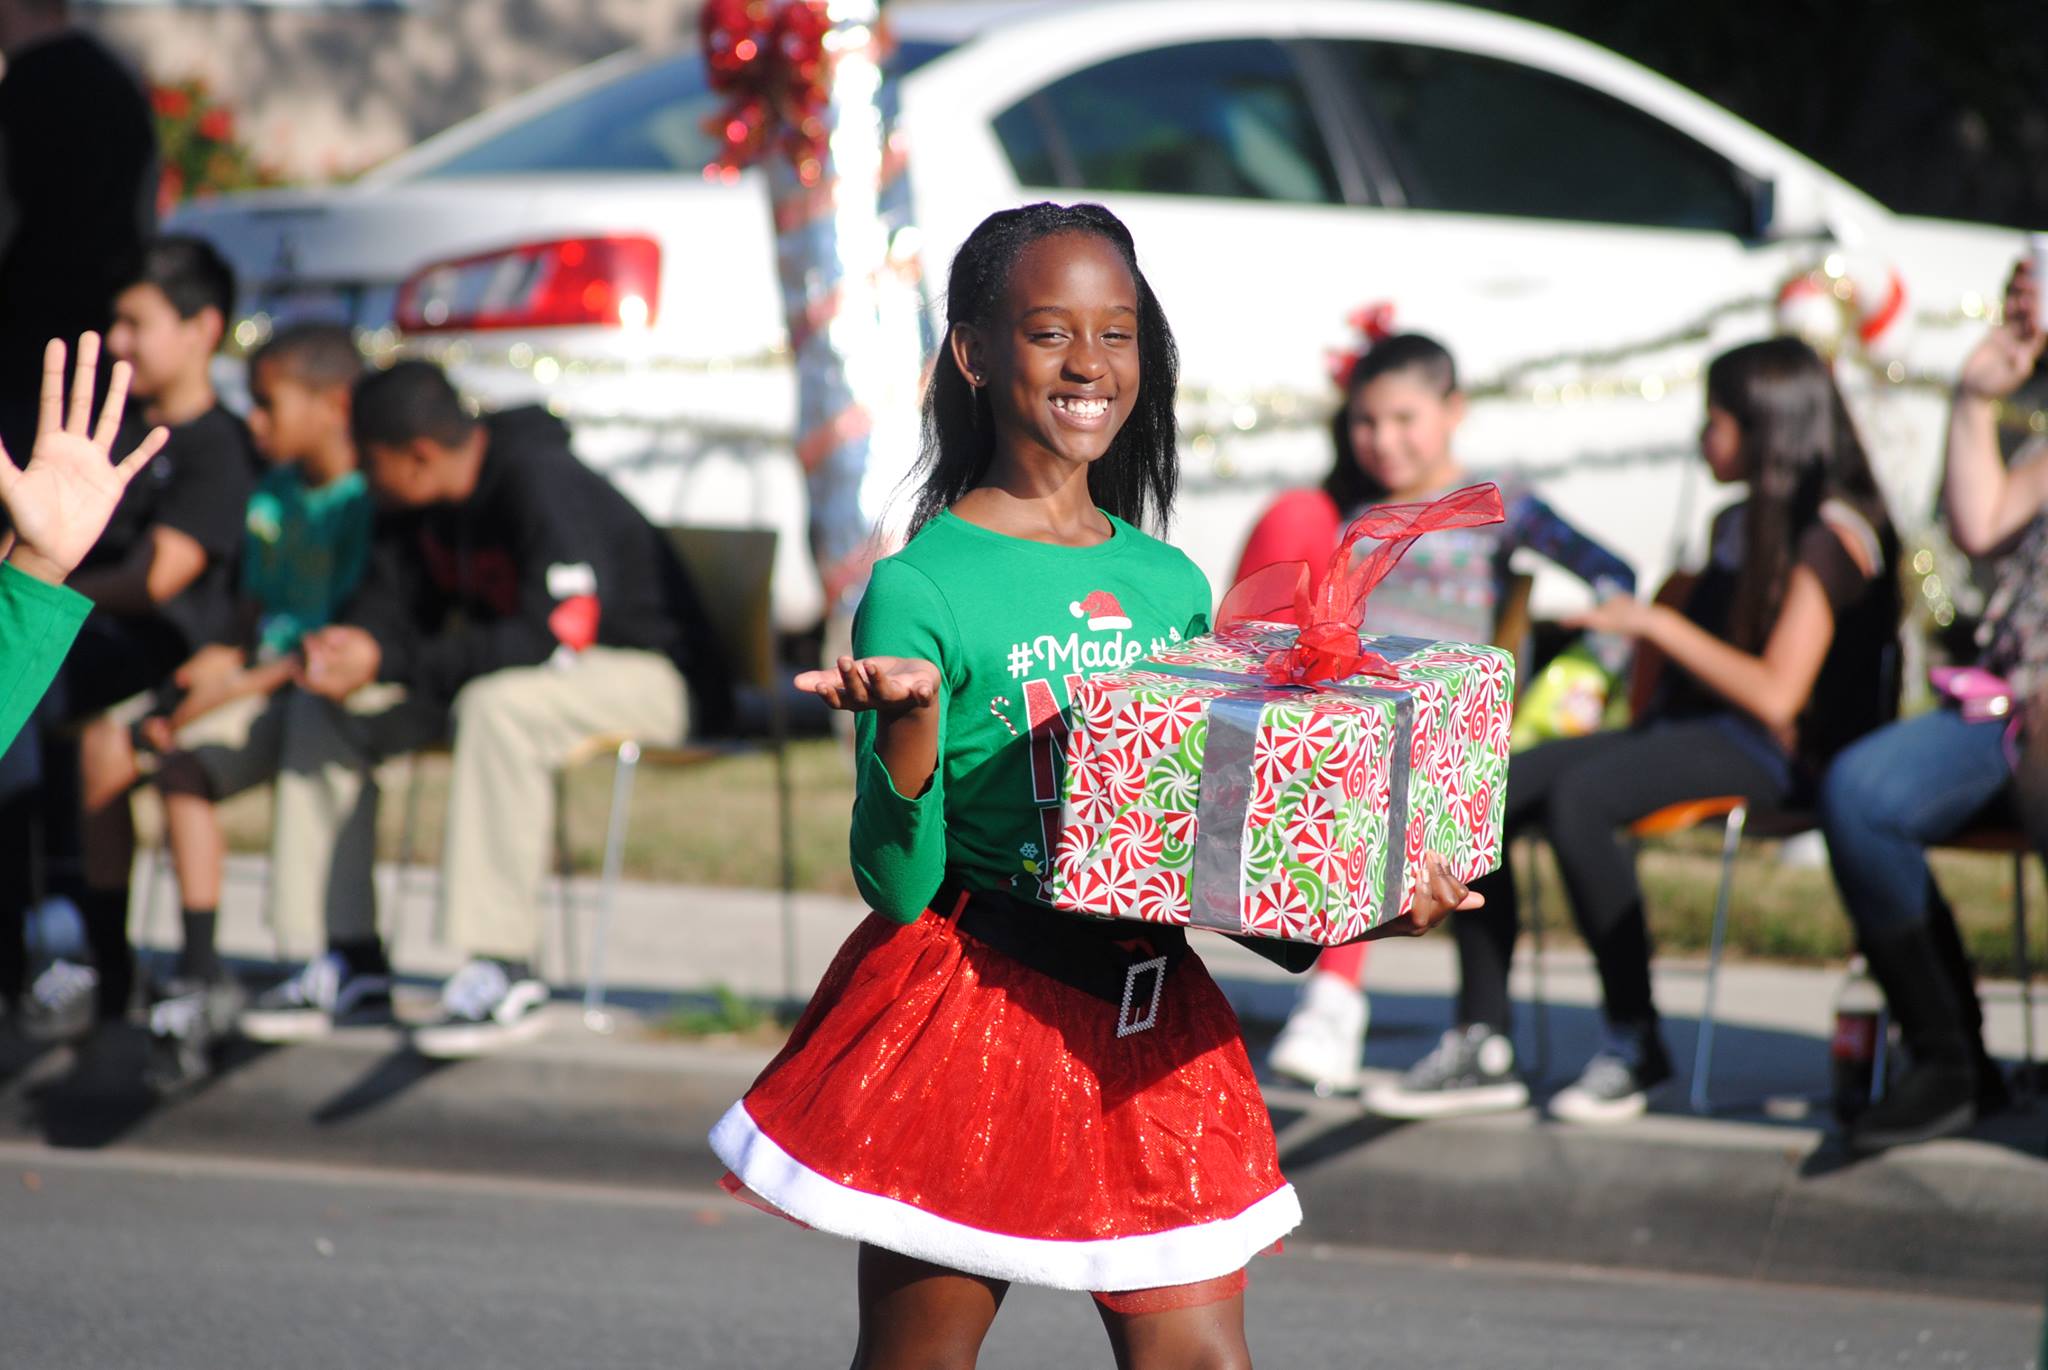 PHOTO GALLERY Downey Christmas Parade — The Downey Patriot